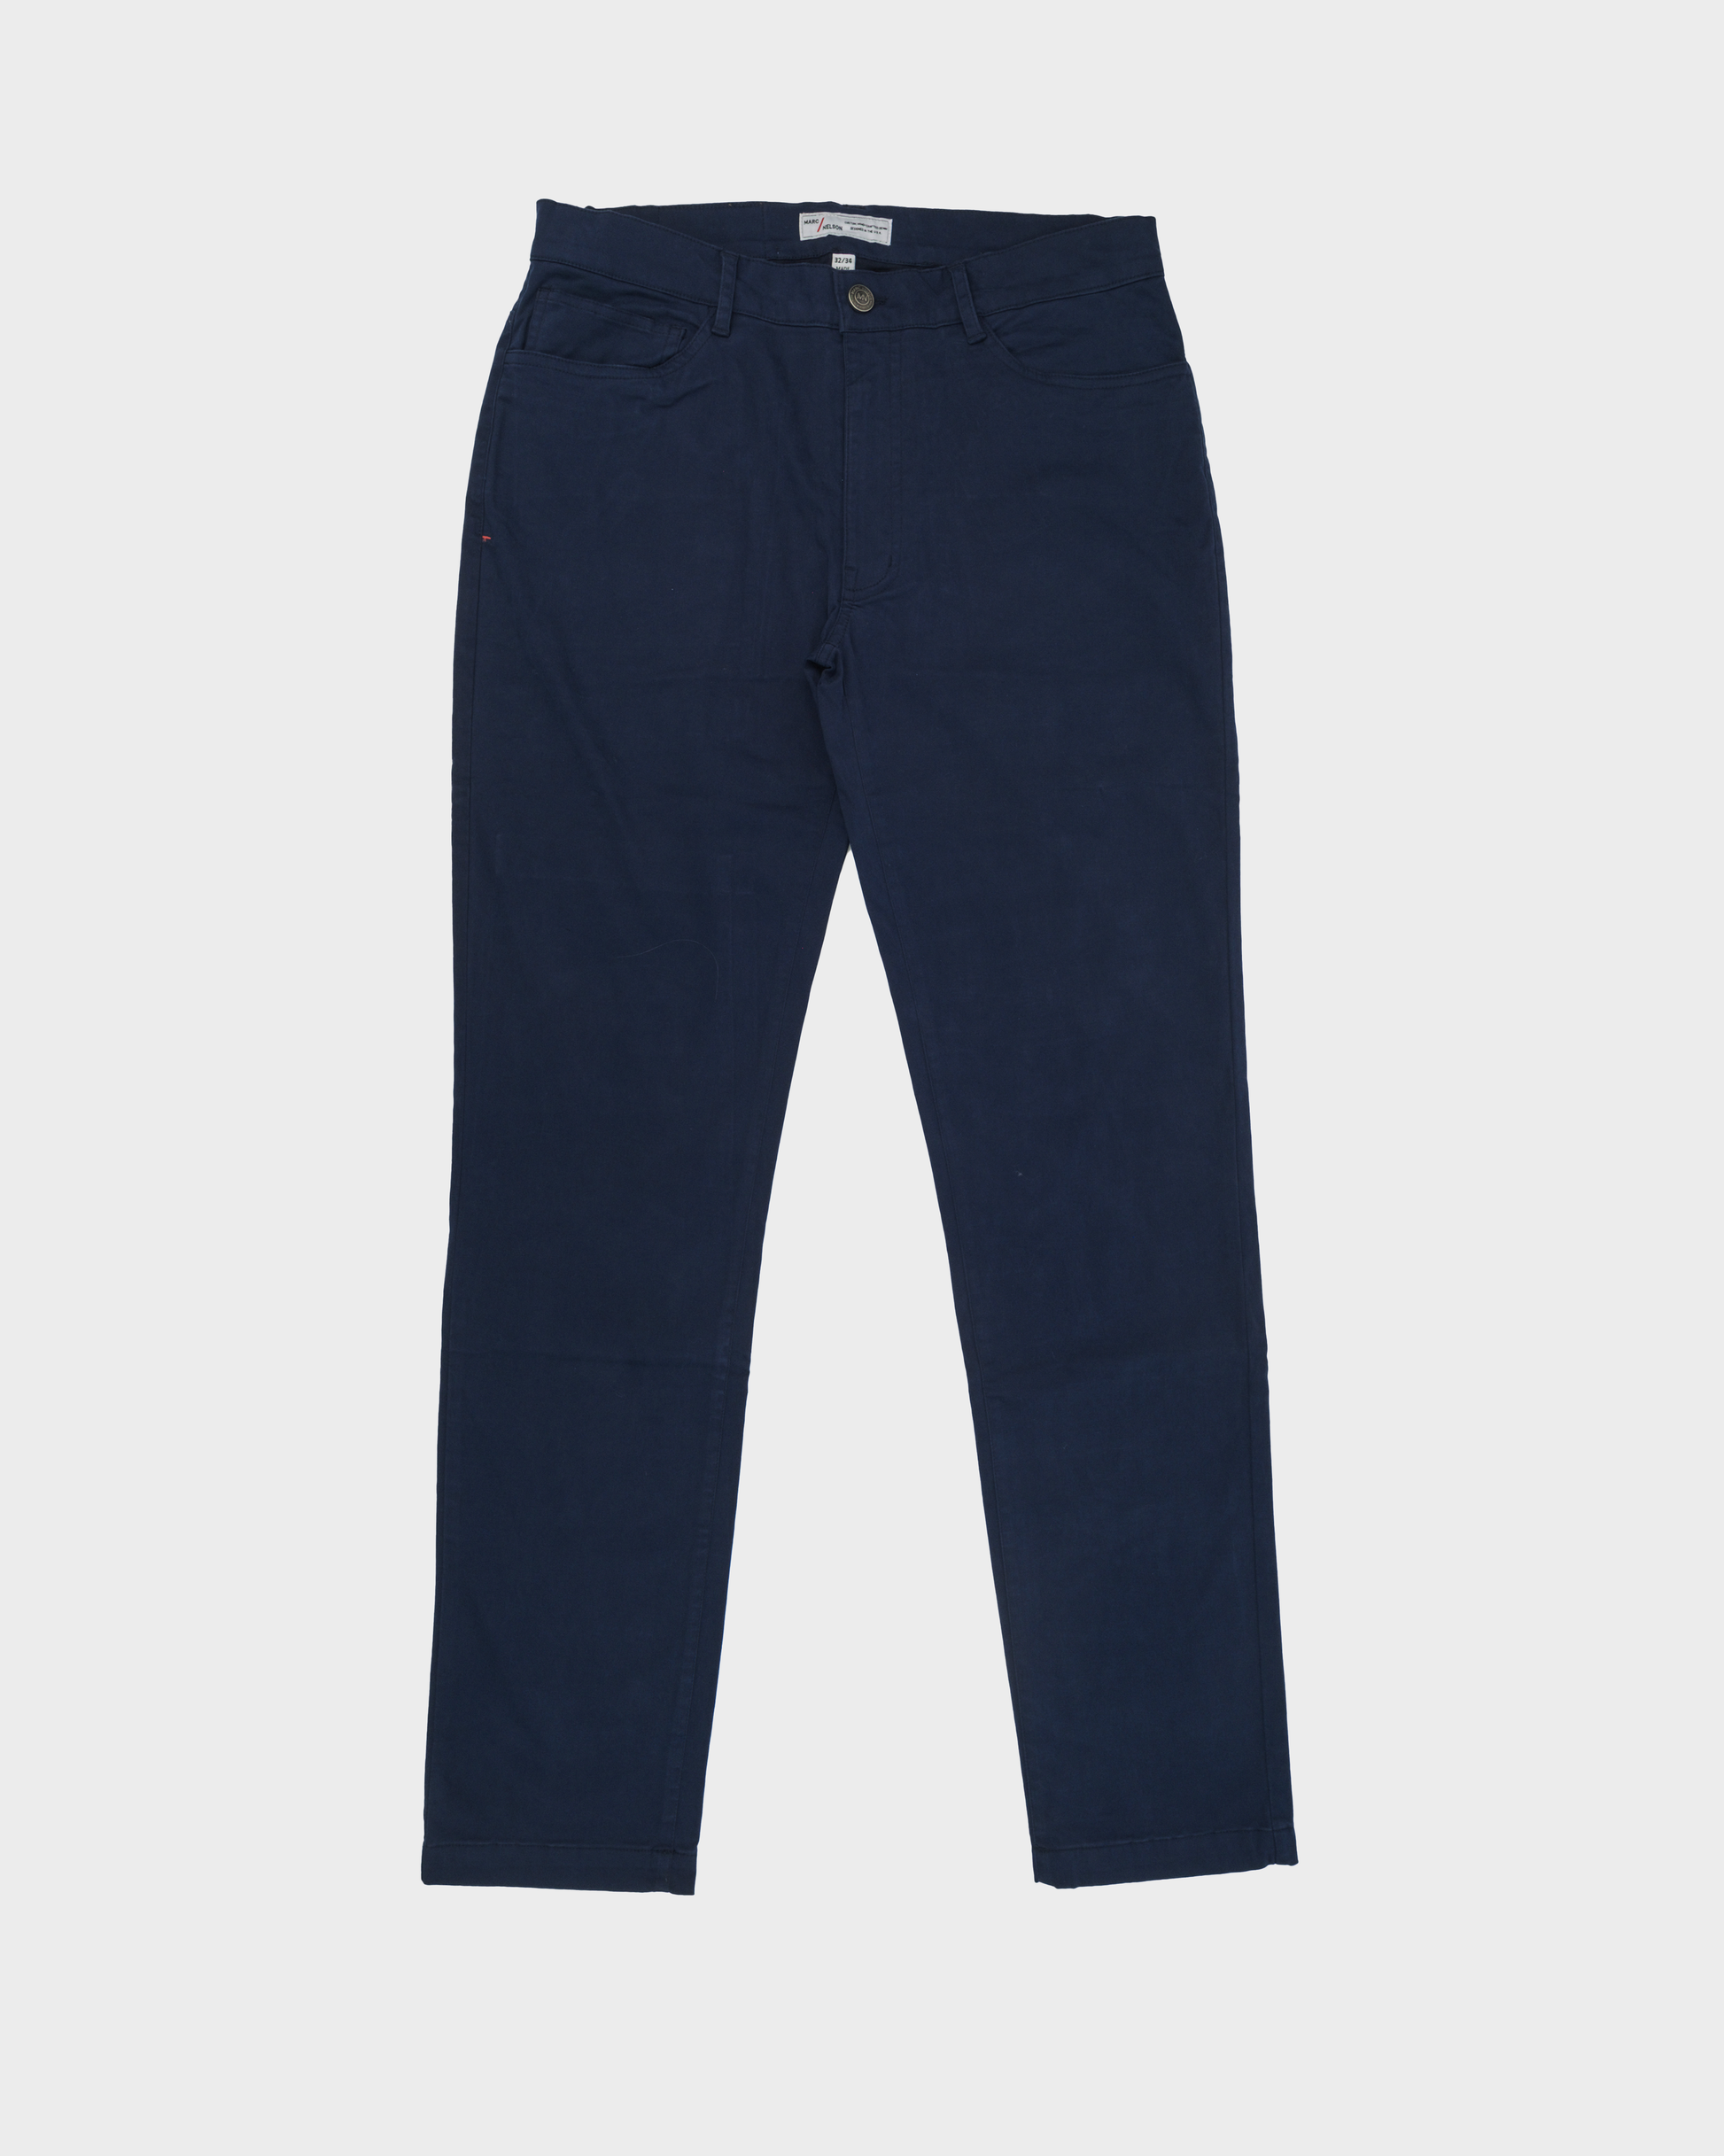 Overhead photo of navy George Pants on white background.